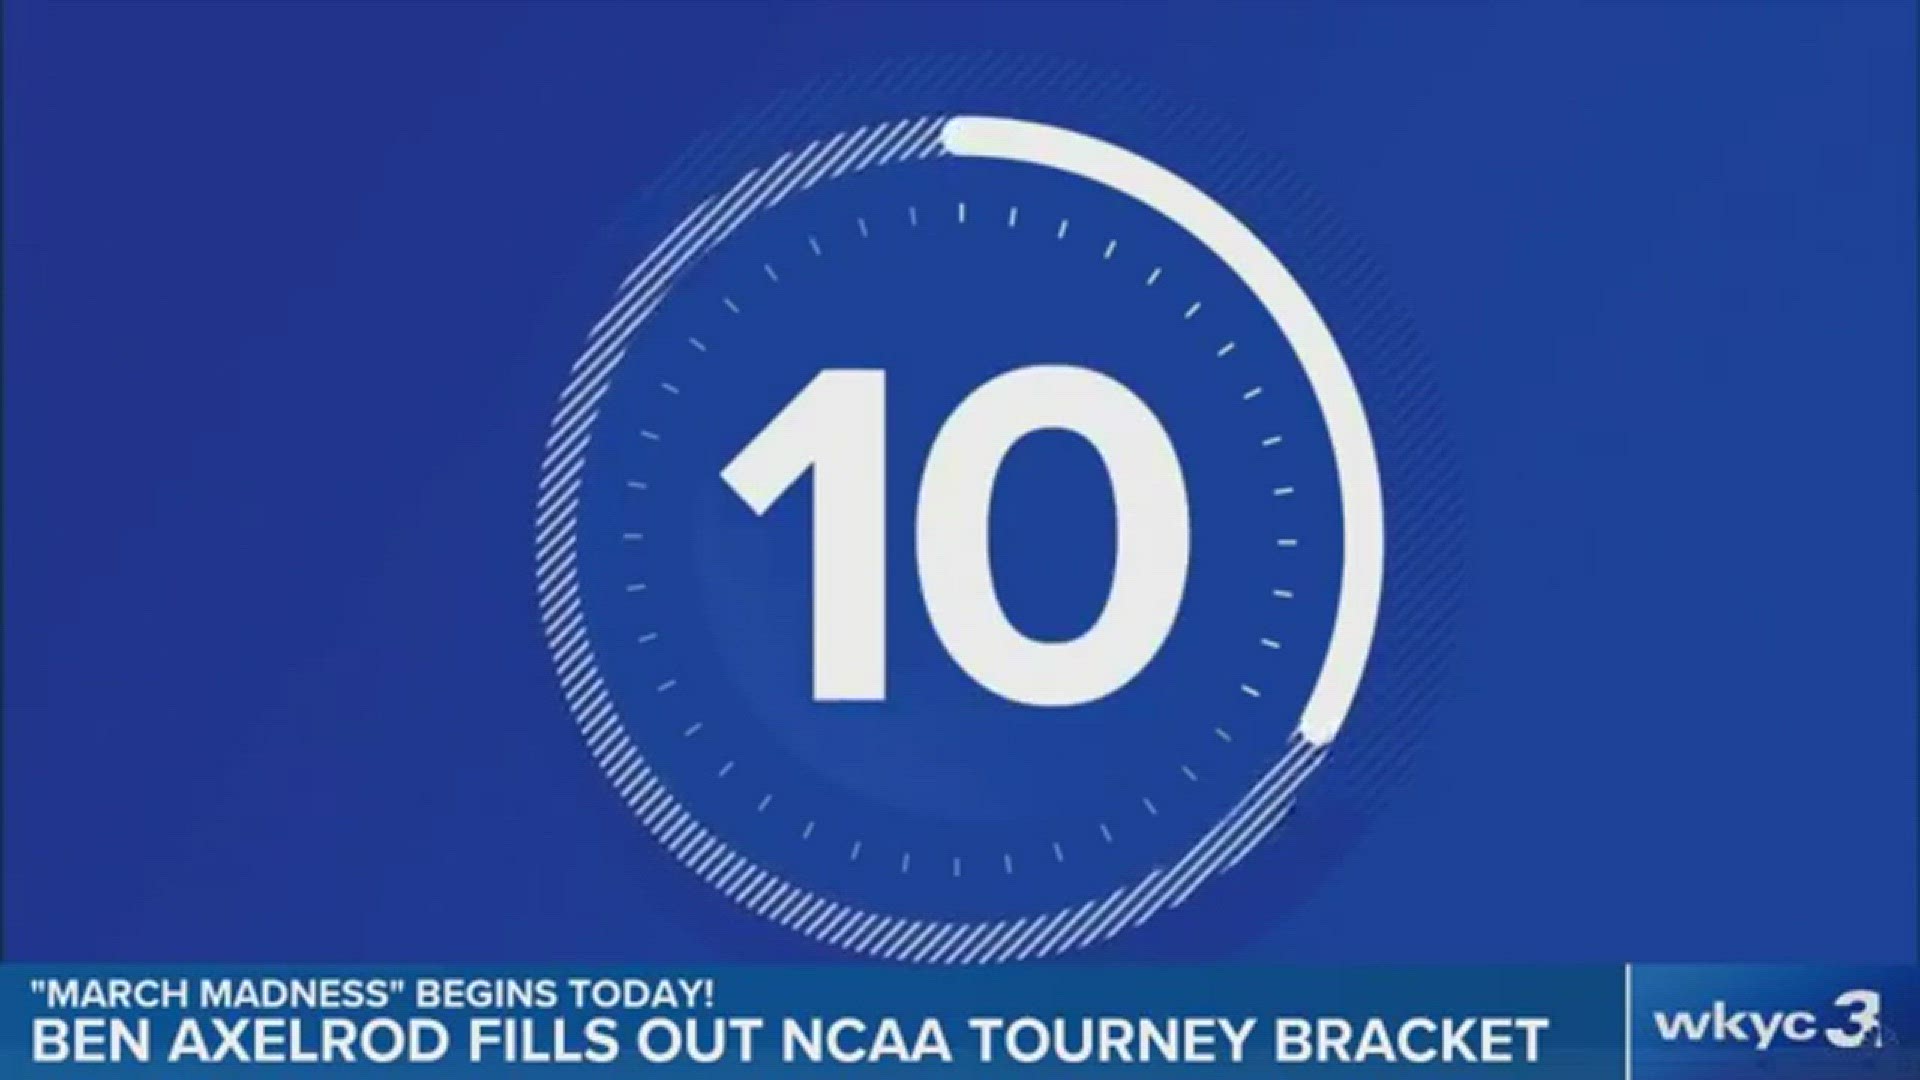 WKYC's Ben Axelrod shares his words of wisdom for the NCAA Tournament